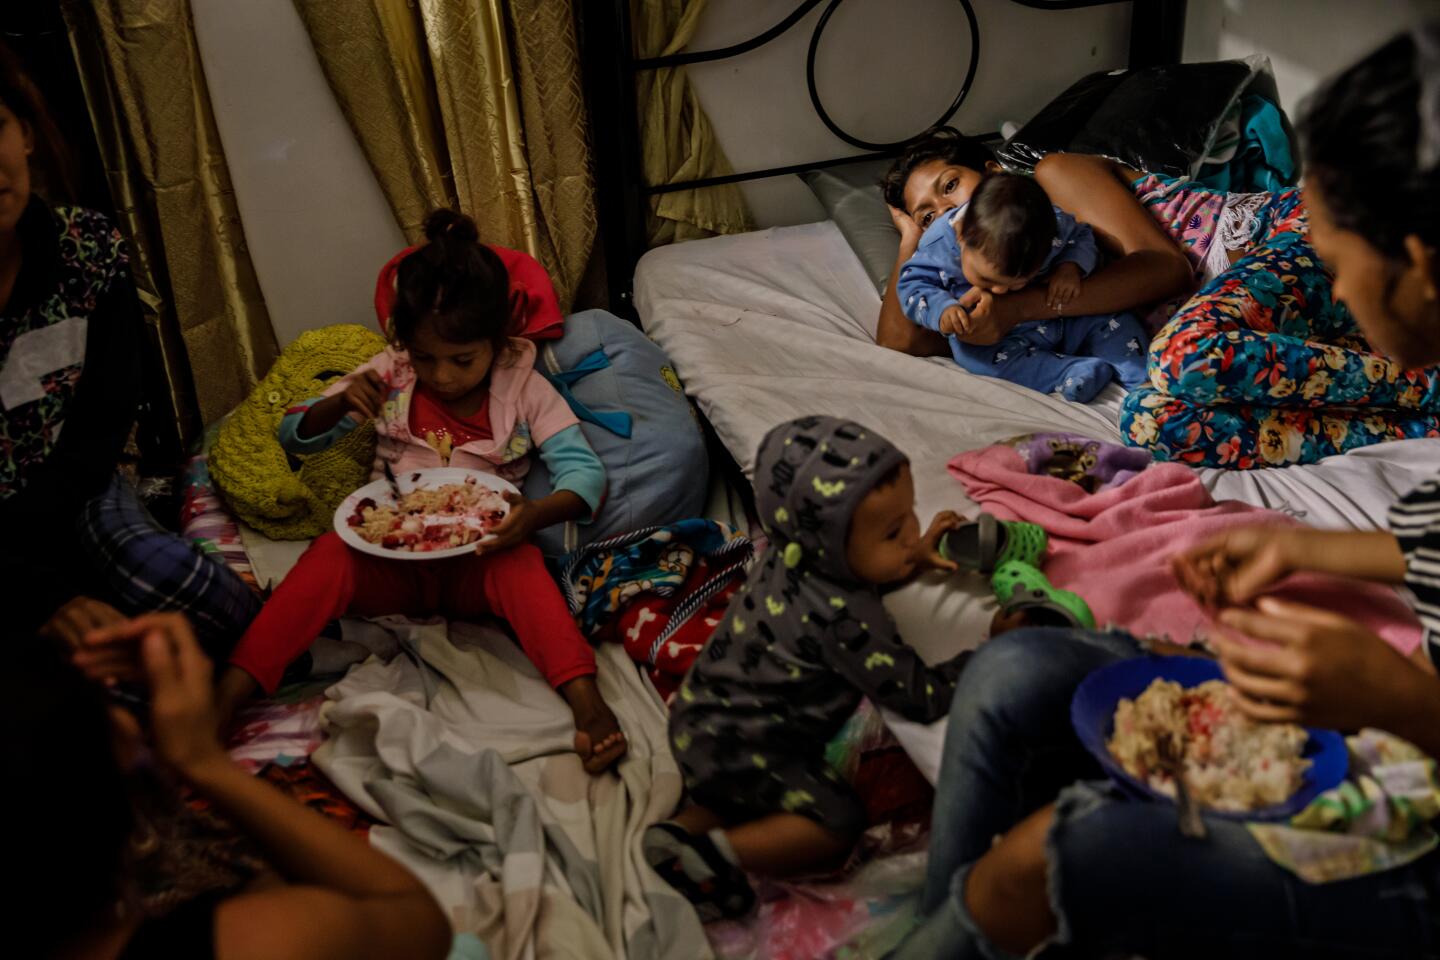 Nevrimar Barreto, top right, holds son Yhoimer Alvarez, 1, as they take refuge in a room set aside for Venezuelan mothers at Martha Duque’s home turned migrant shelter.